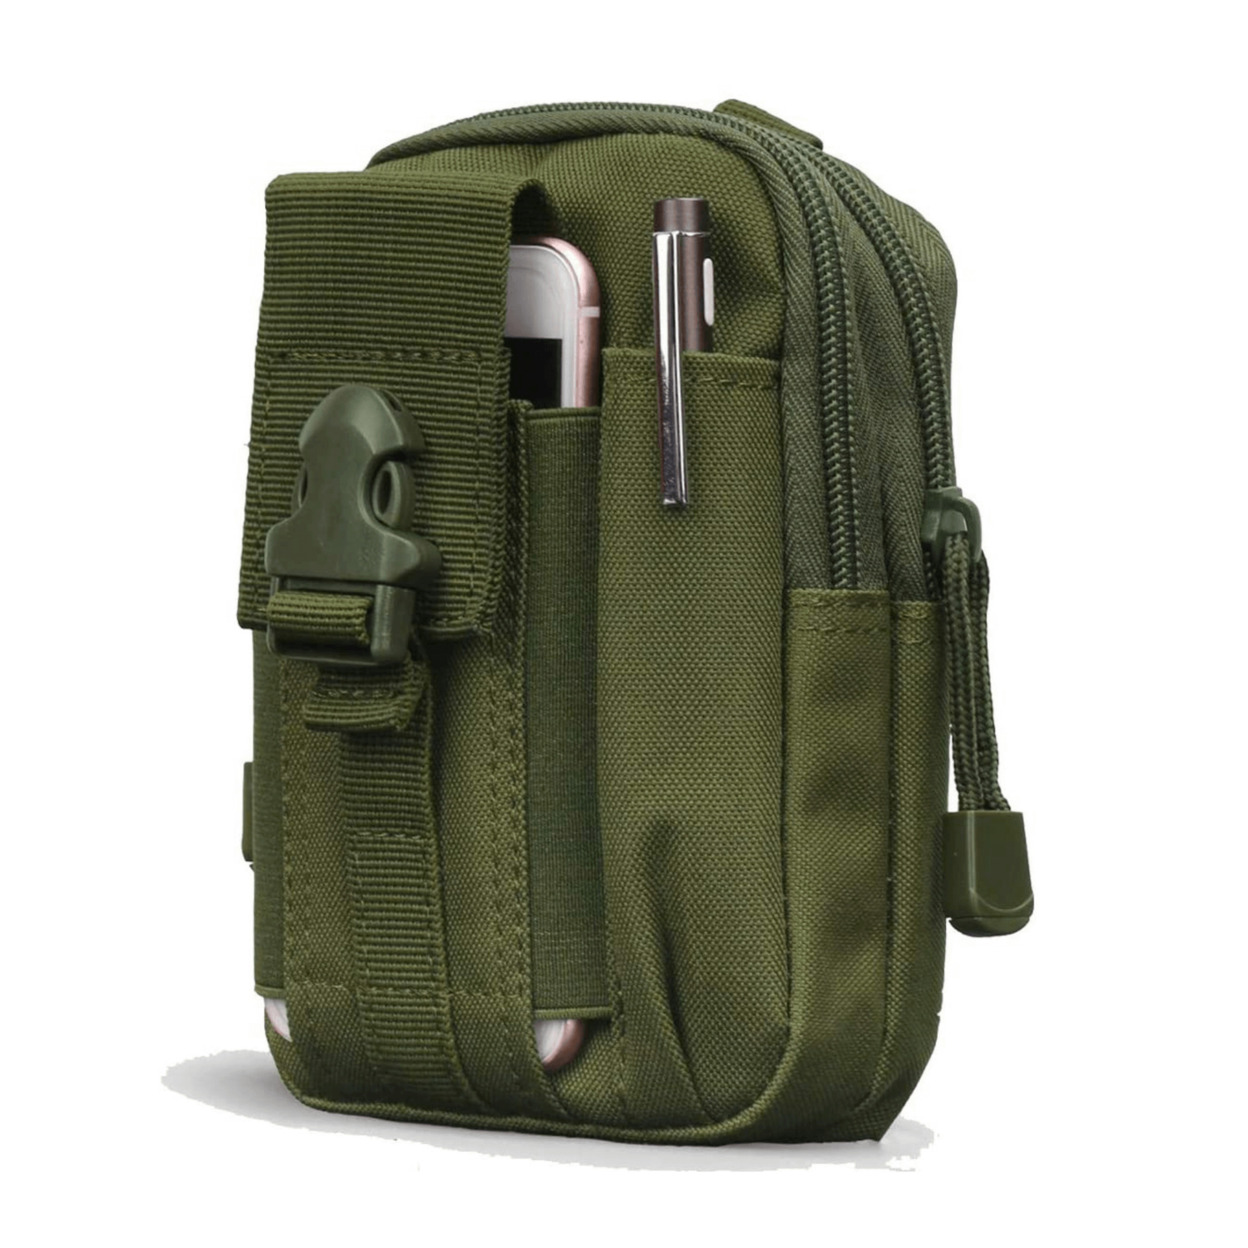 Tactical MOLLE Pouch & Waist Bag For Hiking & Outdoor Activities - Python